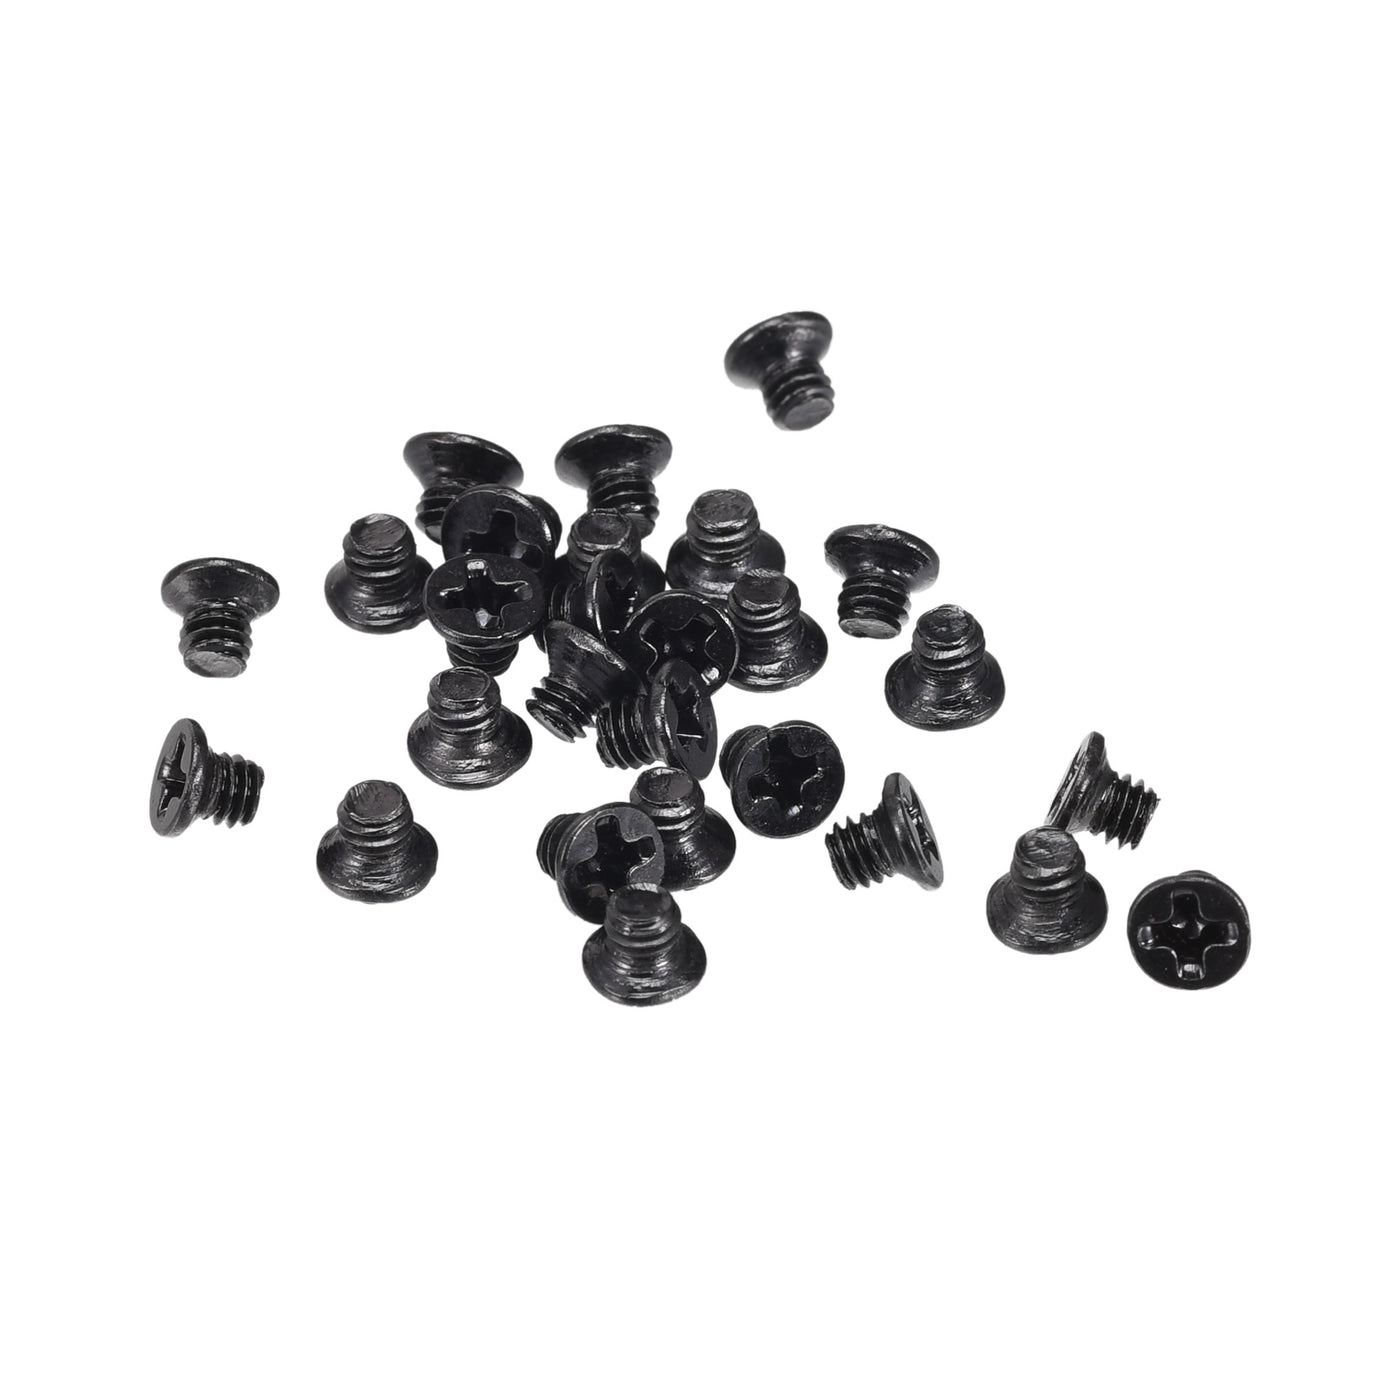 Uxcell Uxcell M2.5 x 18mm Phillips Flat Head Screws Carbon Steel Machine Screws Black for Home Office Computer Case Appliance Equipment 500pcs